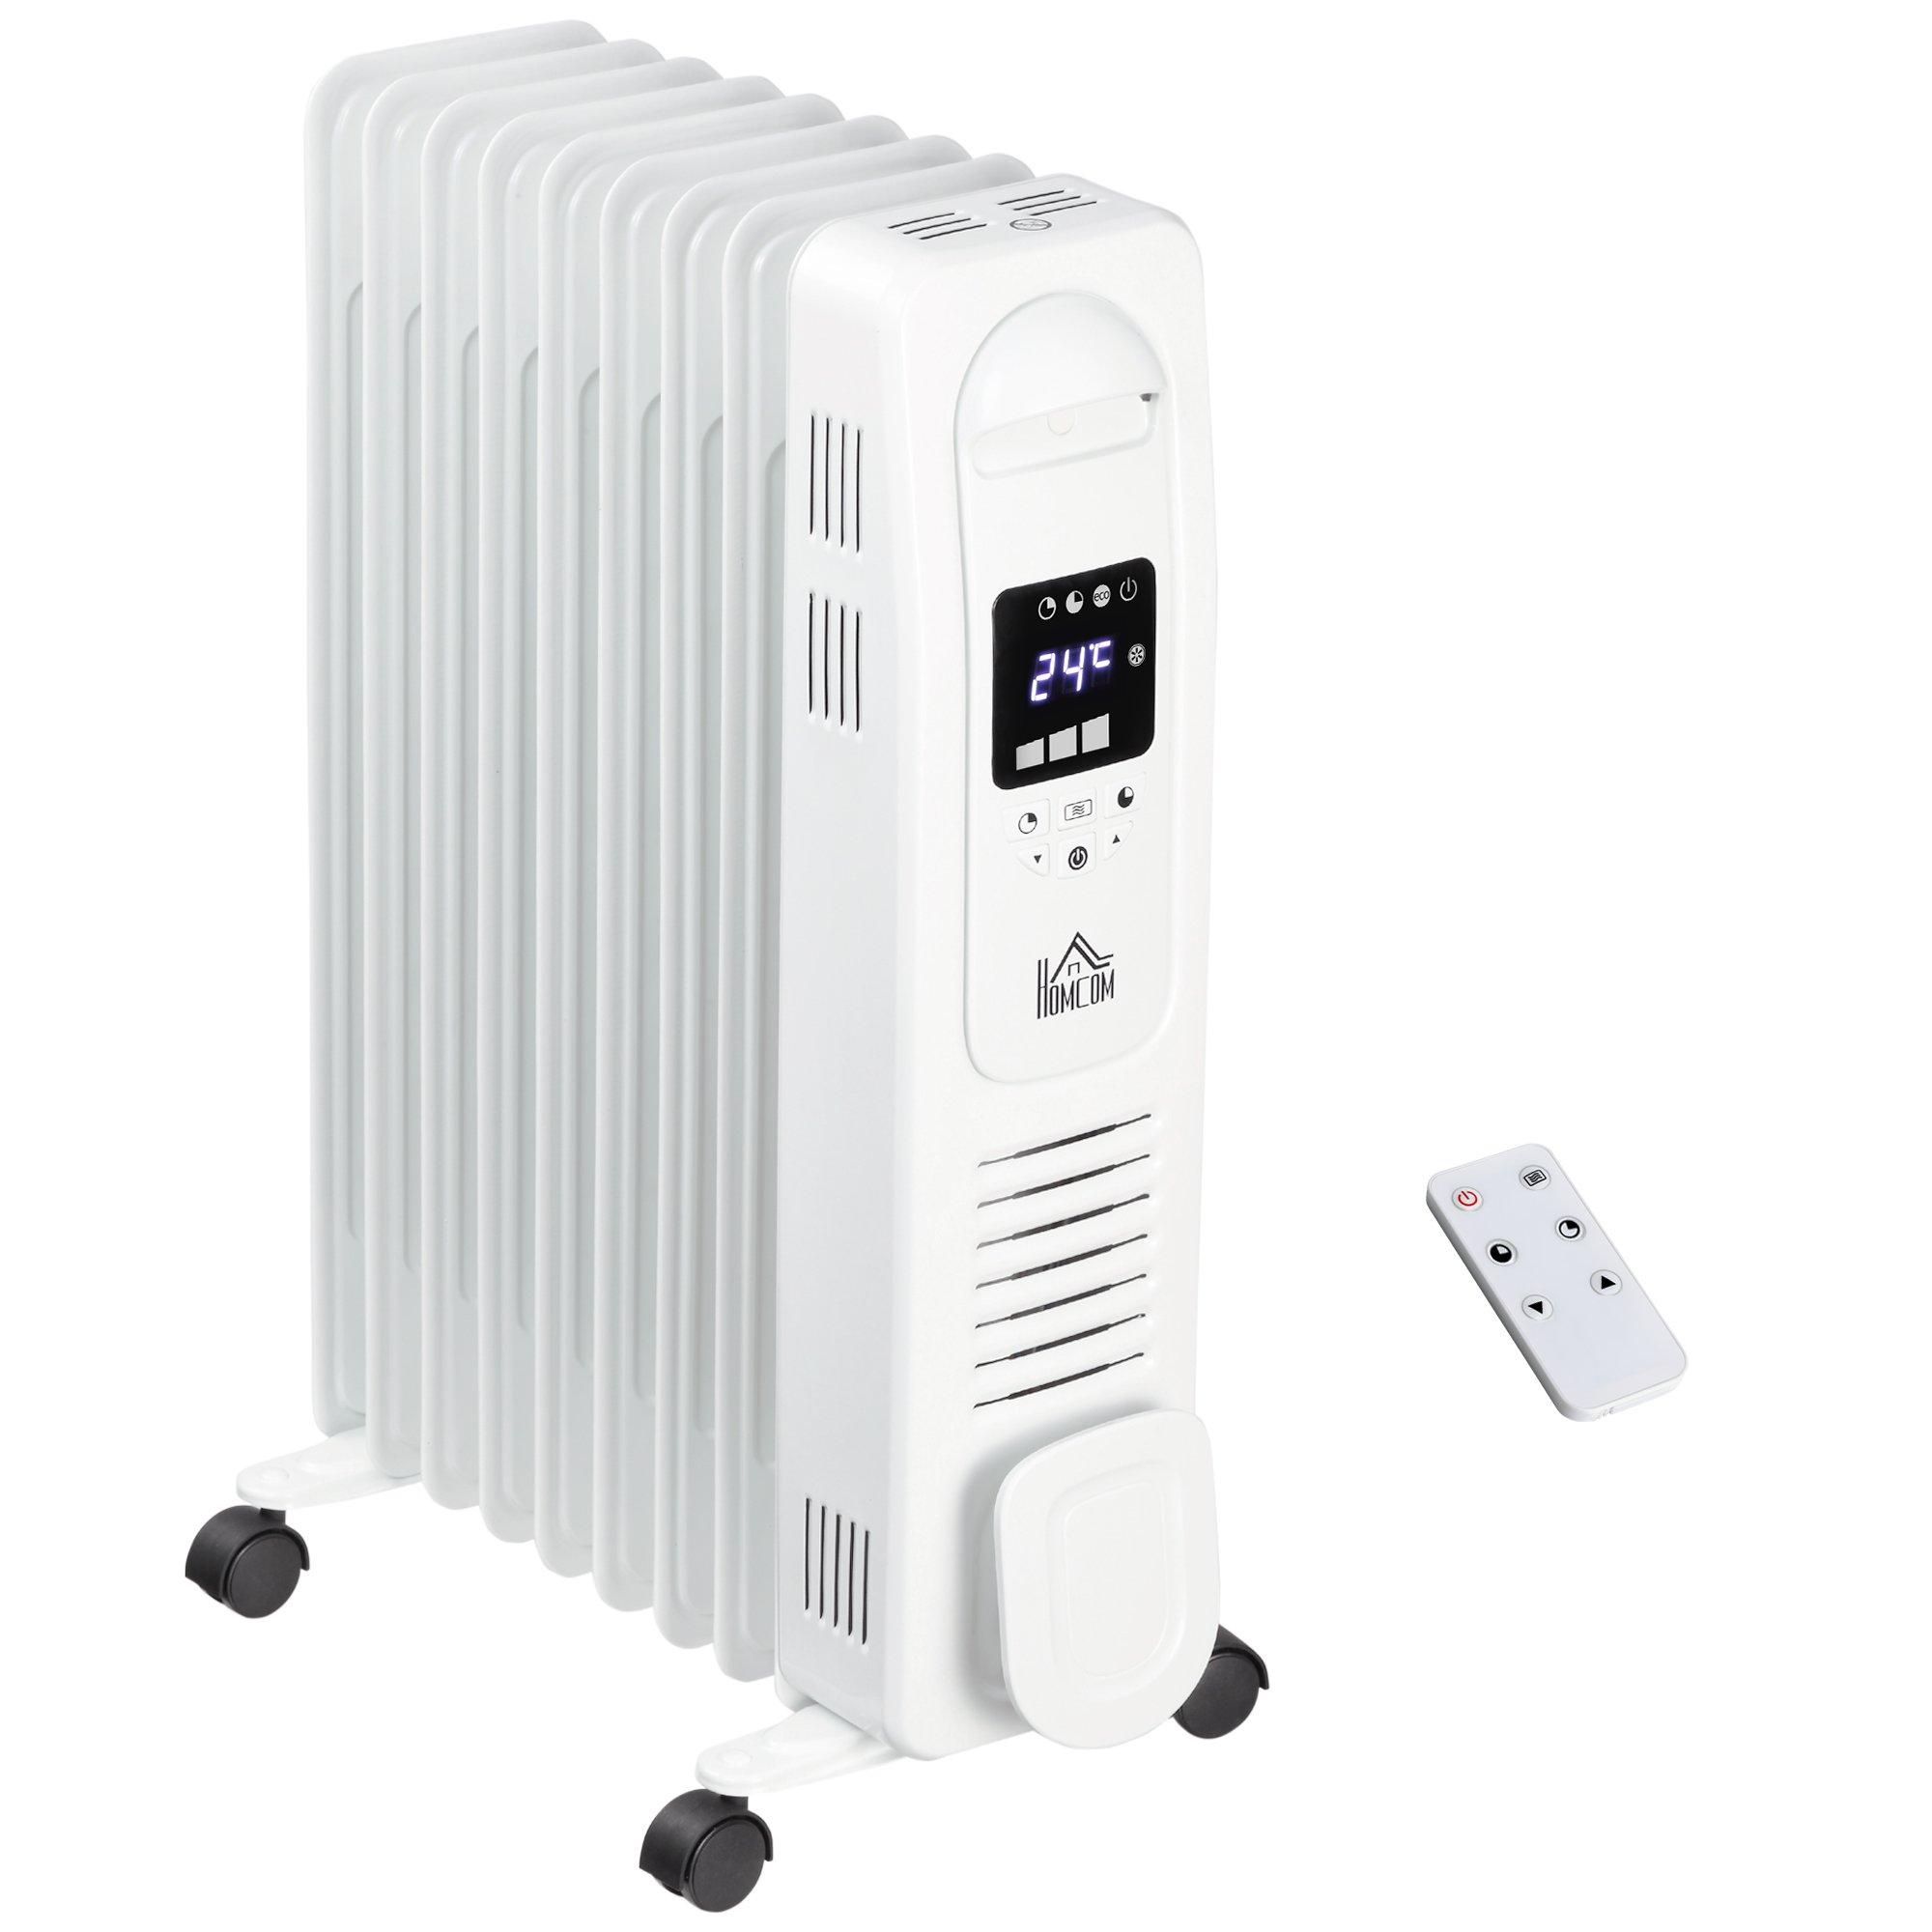 Oil Filled Radiator, 9 Fin Portable Heater with Timer Remote Control